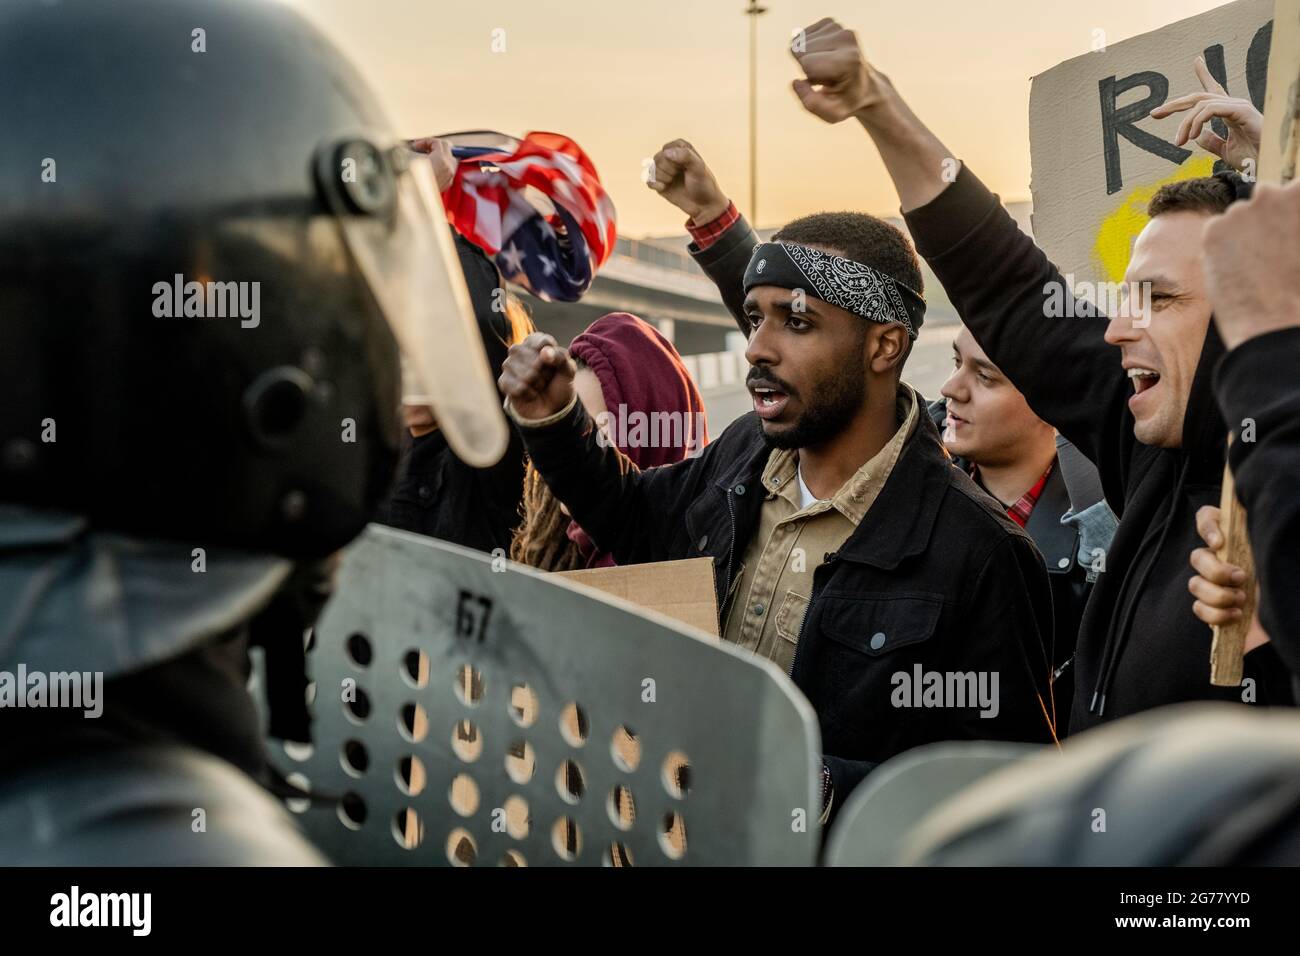 Group of disgruntled young multi-ethnic people raising arms and screaming protecting speech at riot while standing against police with shields Stock Photo